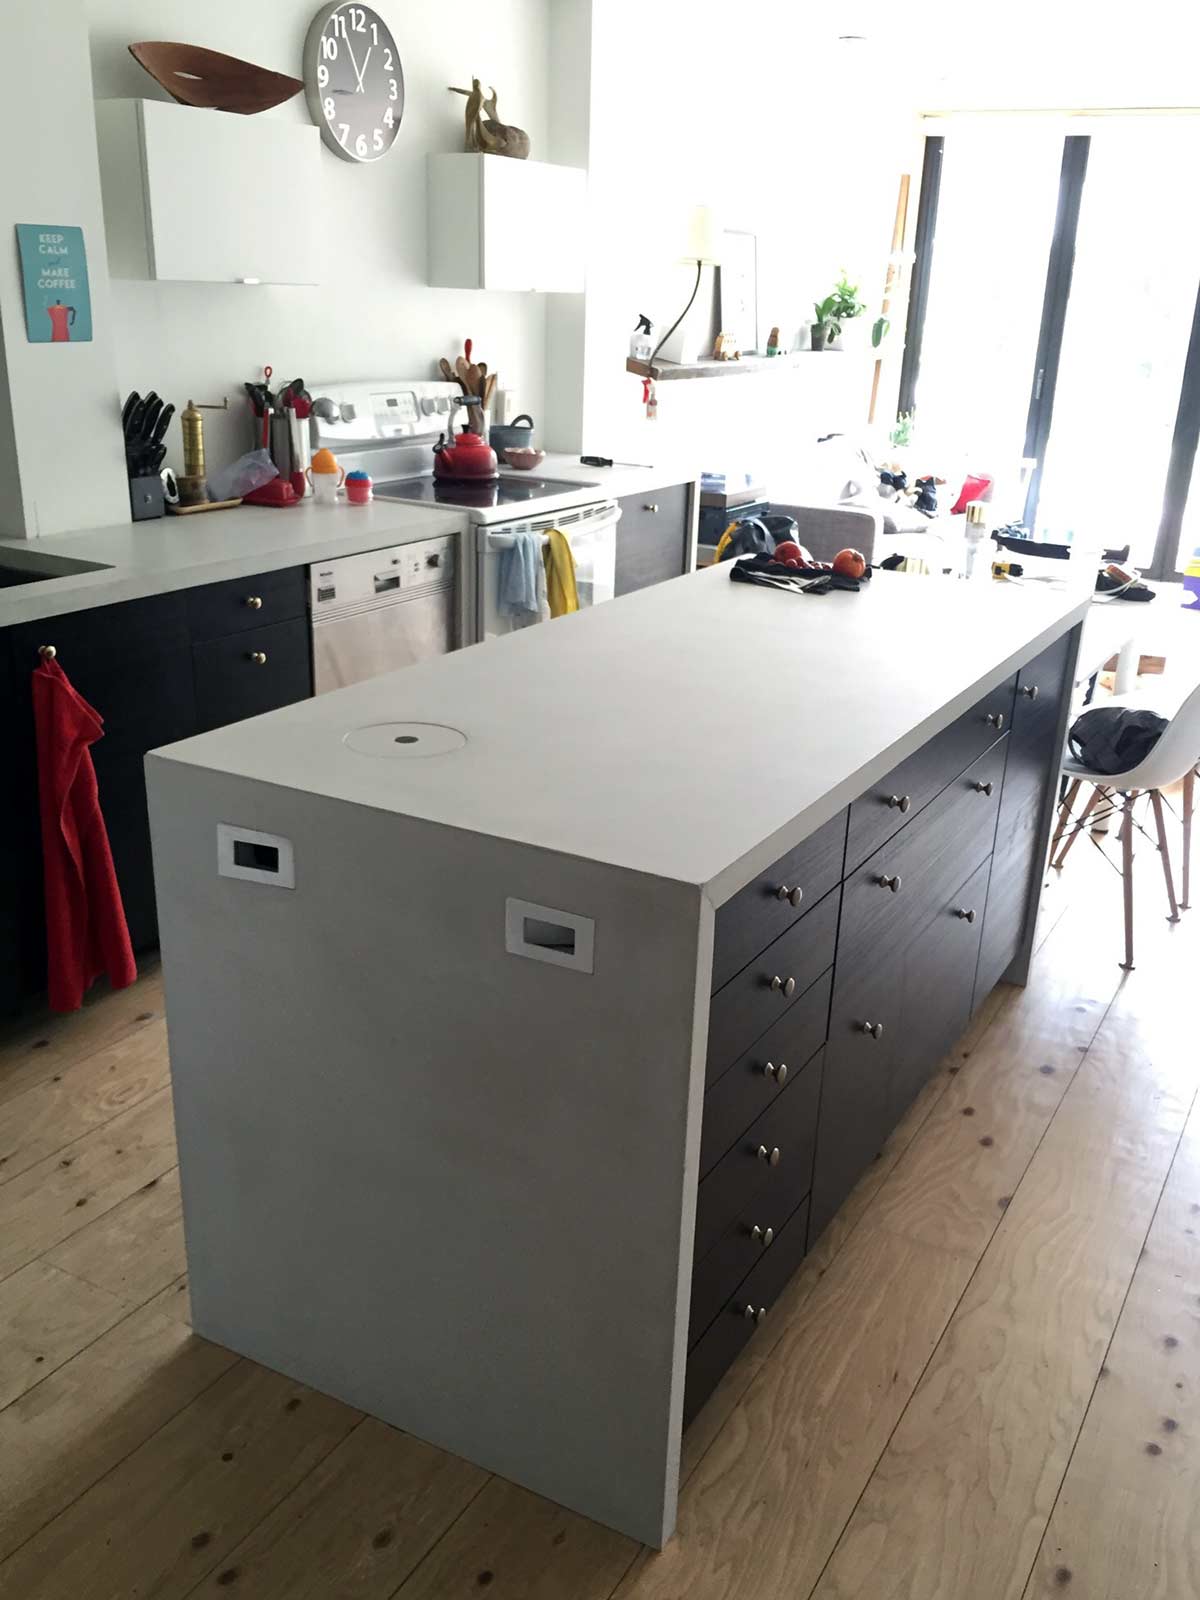 DIY concrete countertop kitchen island with waterfall end